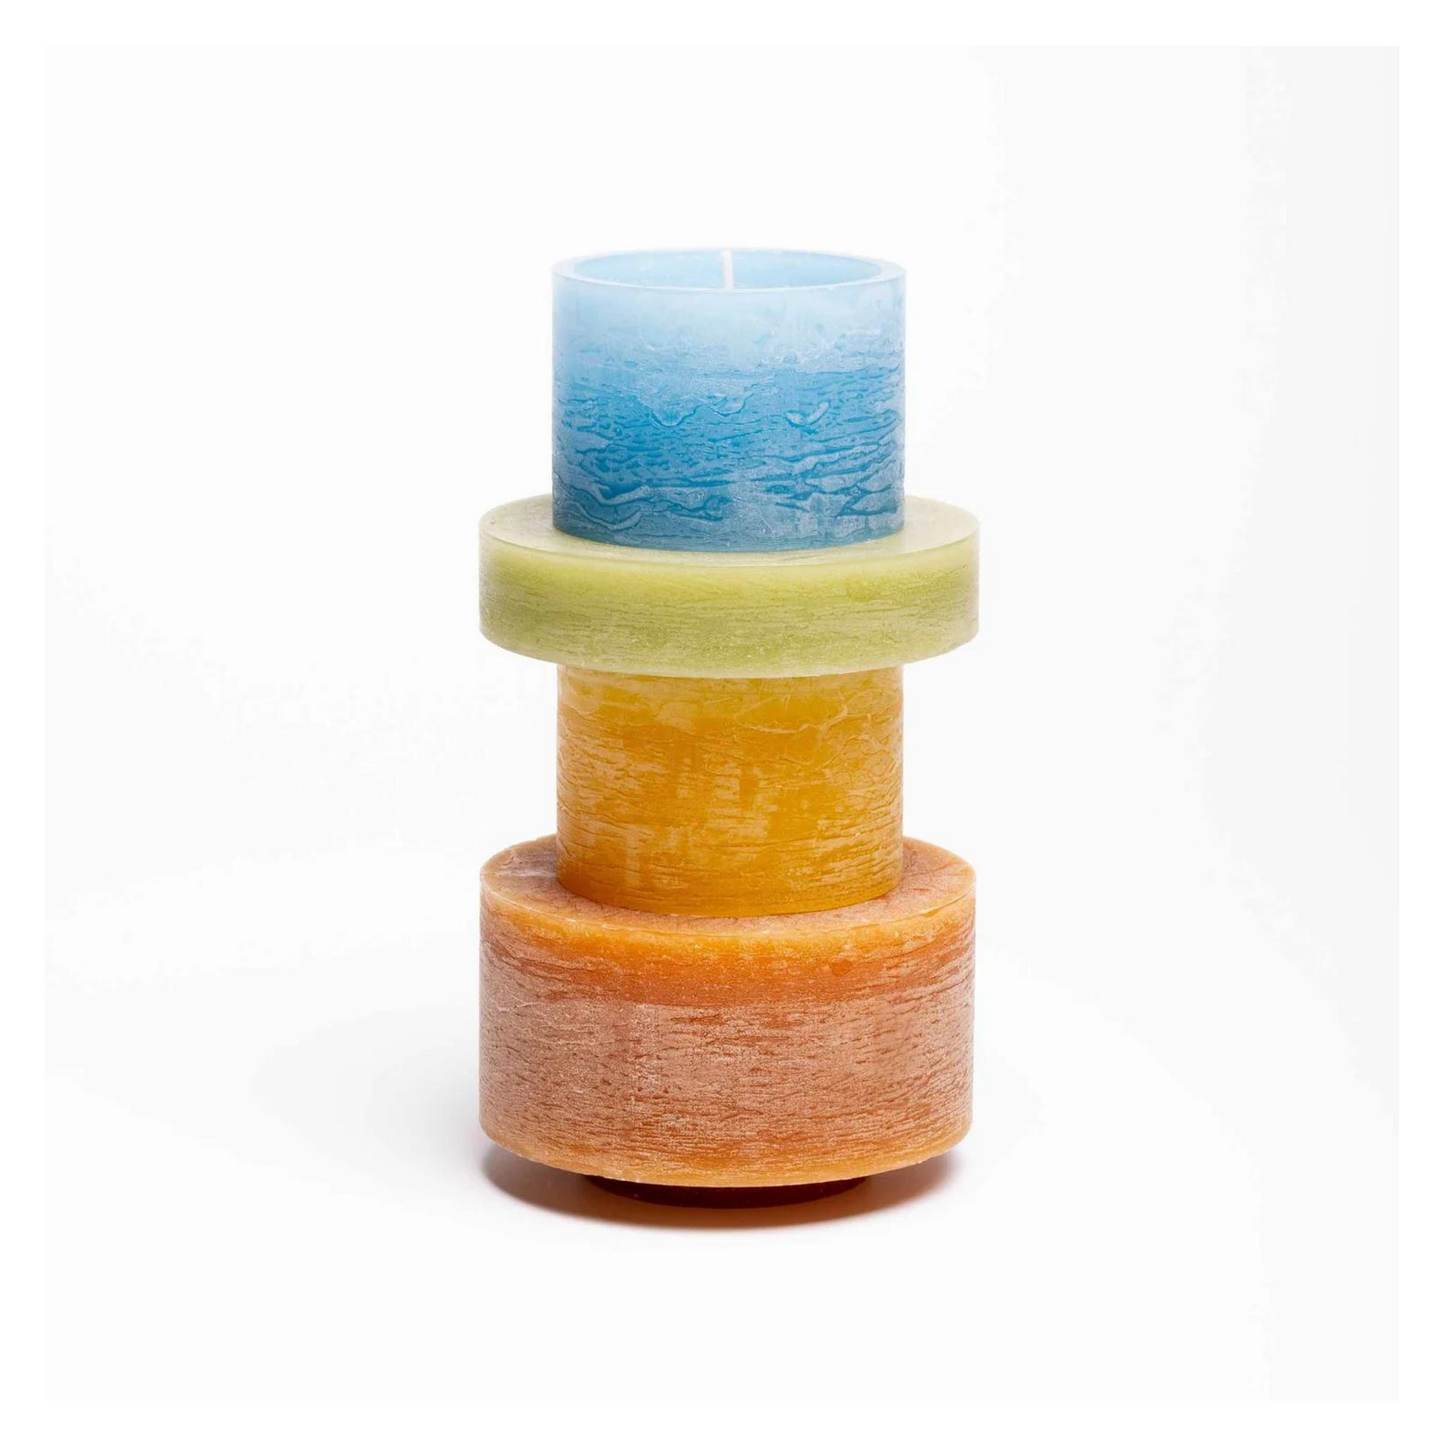  candle made up of 4 different colour components, stacked vertically.